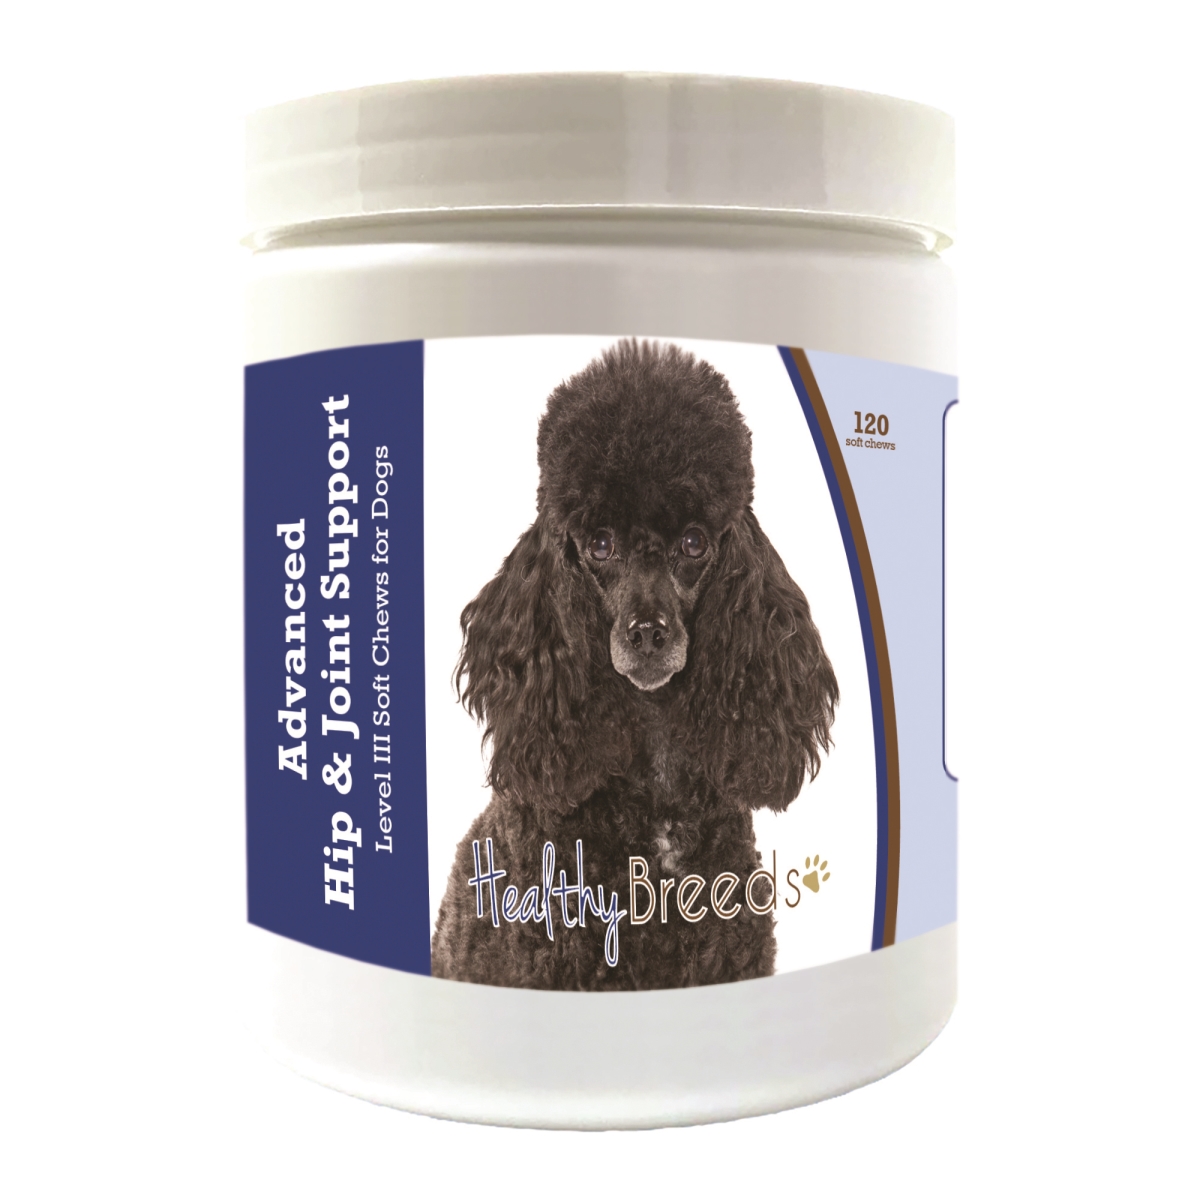 Picture of Healthy Breeds 192959898965 Poodle Advanced Hip & Joint Support Level III Soft Chews for Dogs